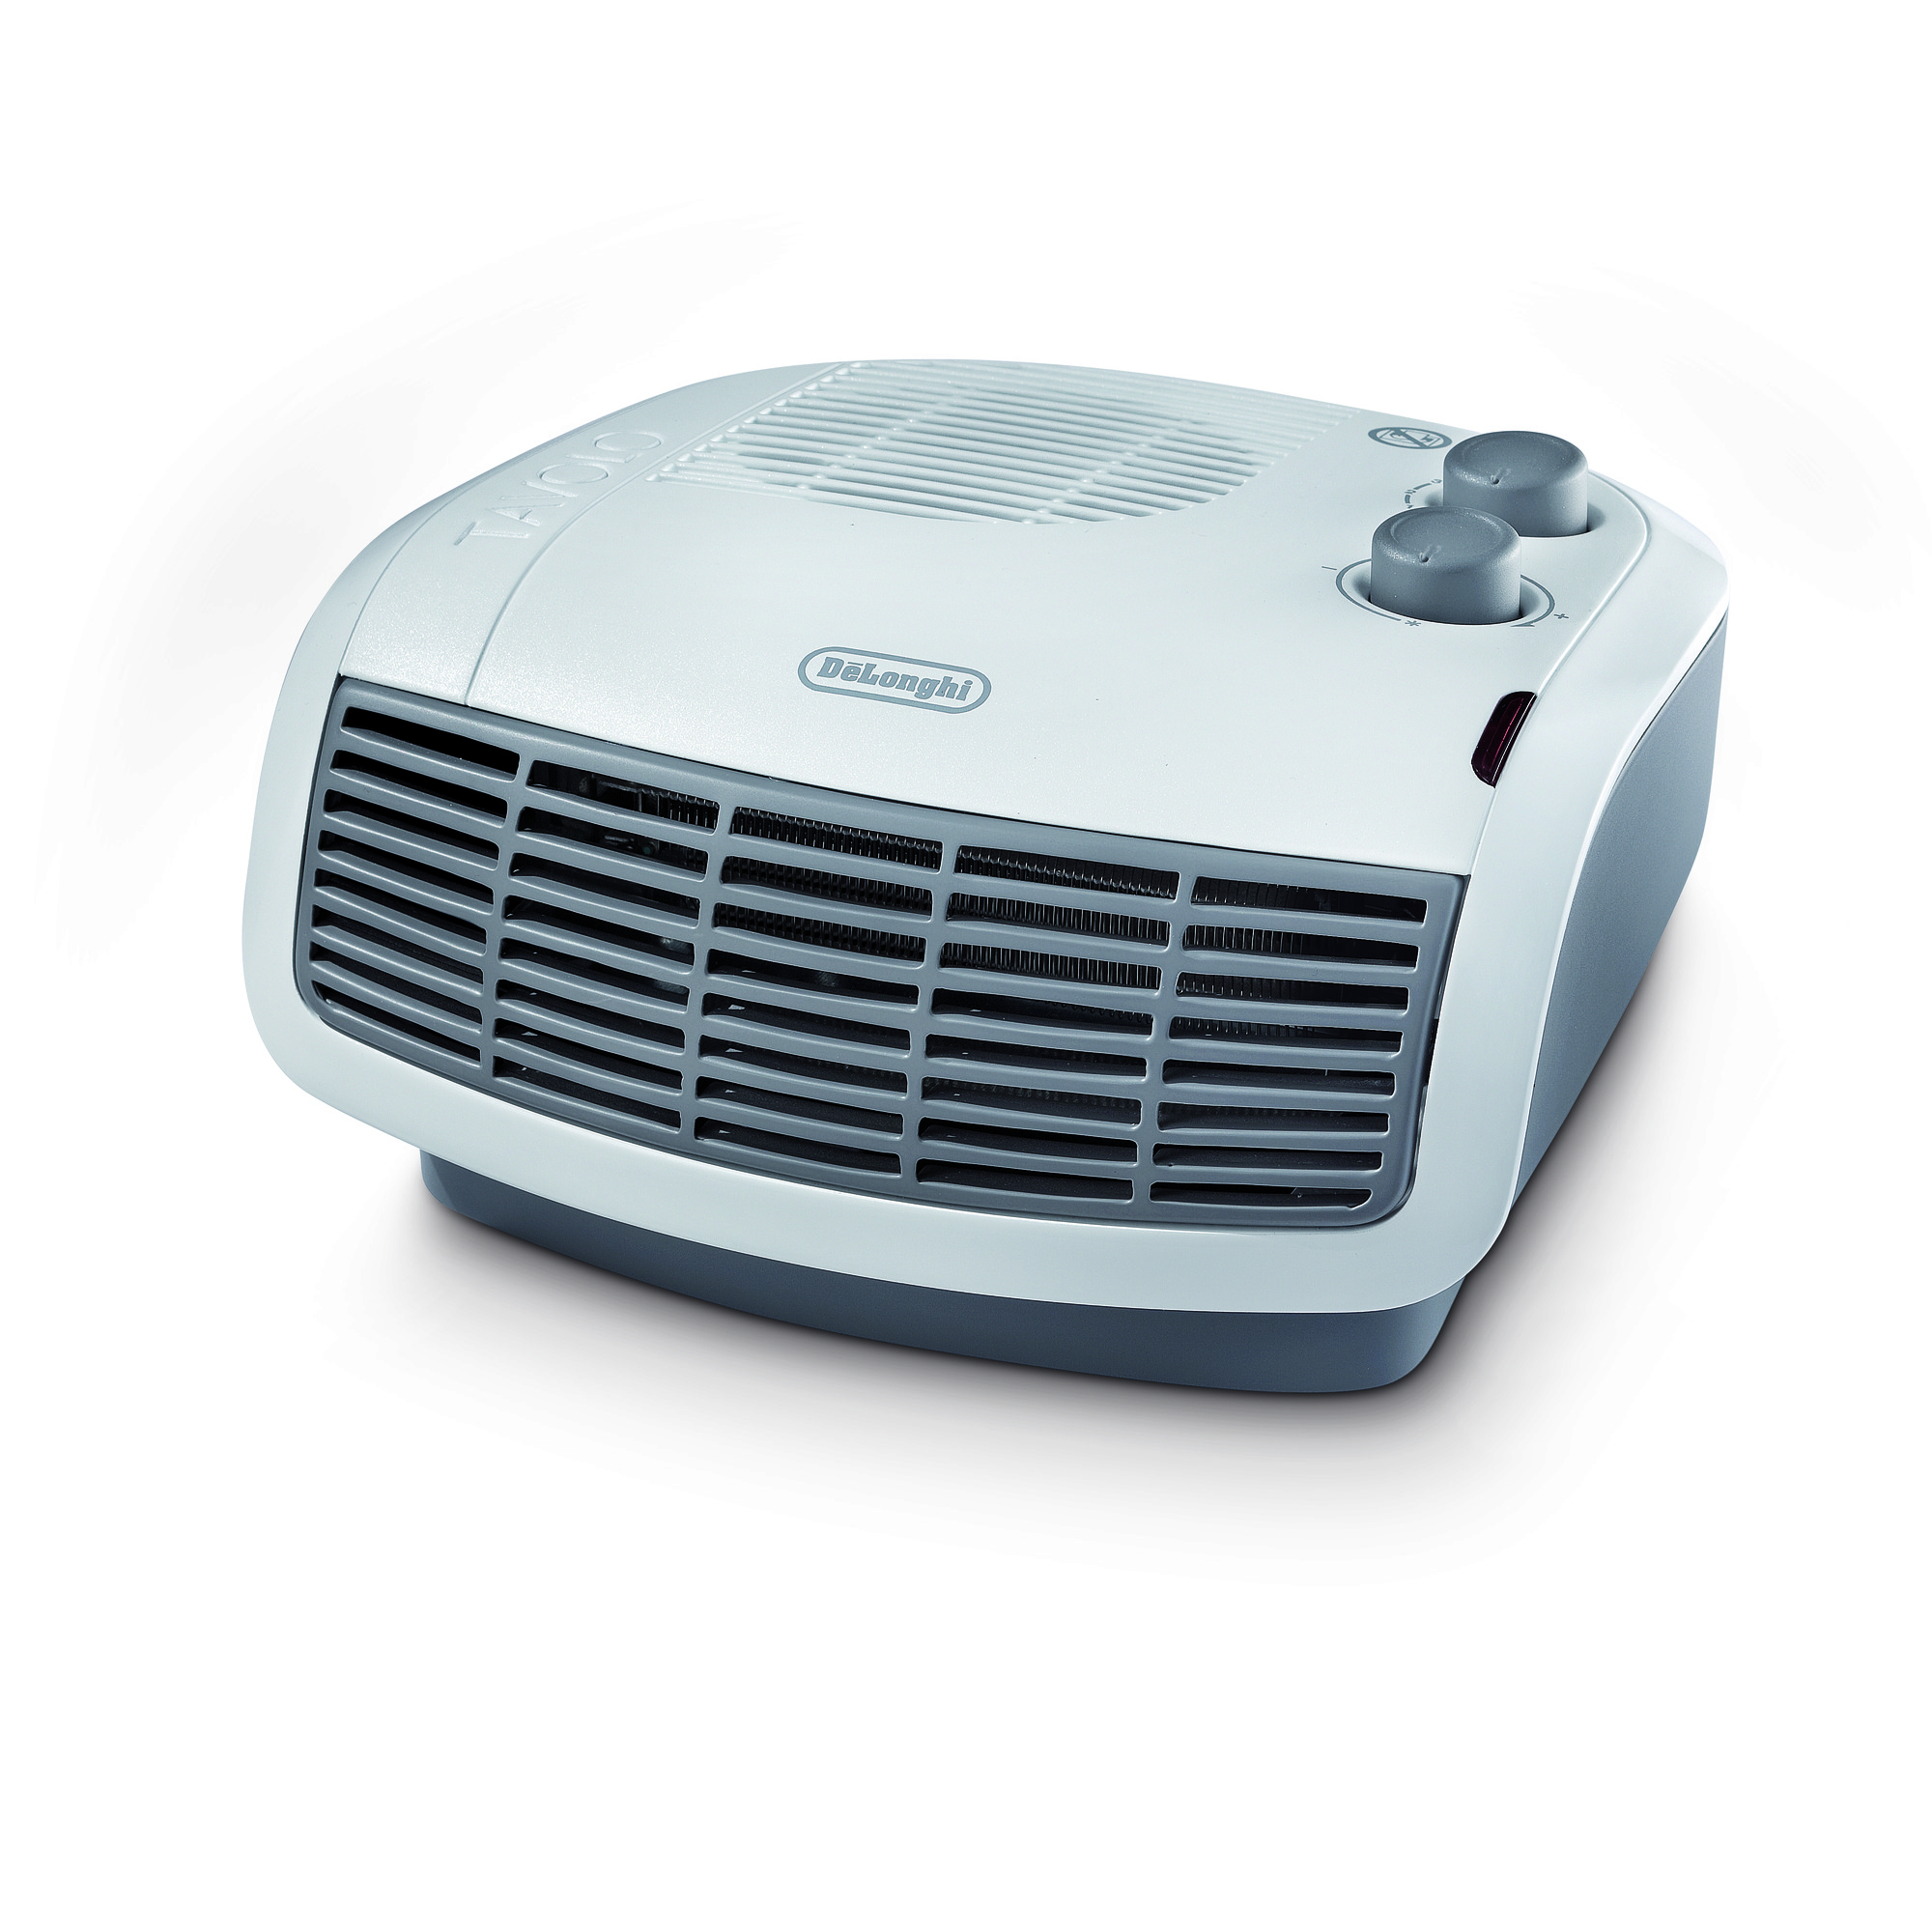 Details About Delonghi Fan Heater Htf3033 3kw Refurbished With 1 Year Guarantee throughout size 2000 X 2000